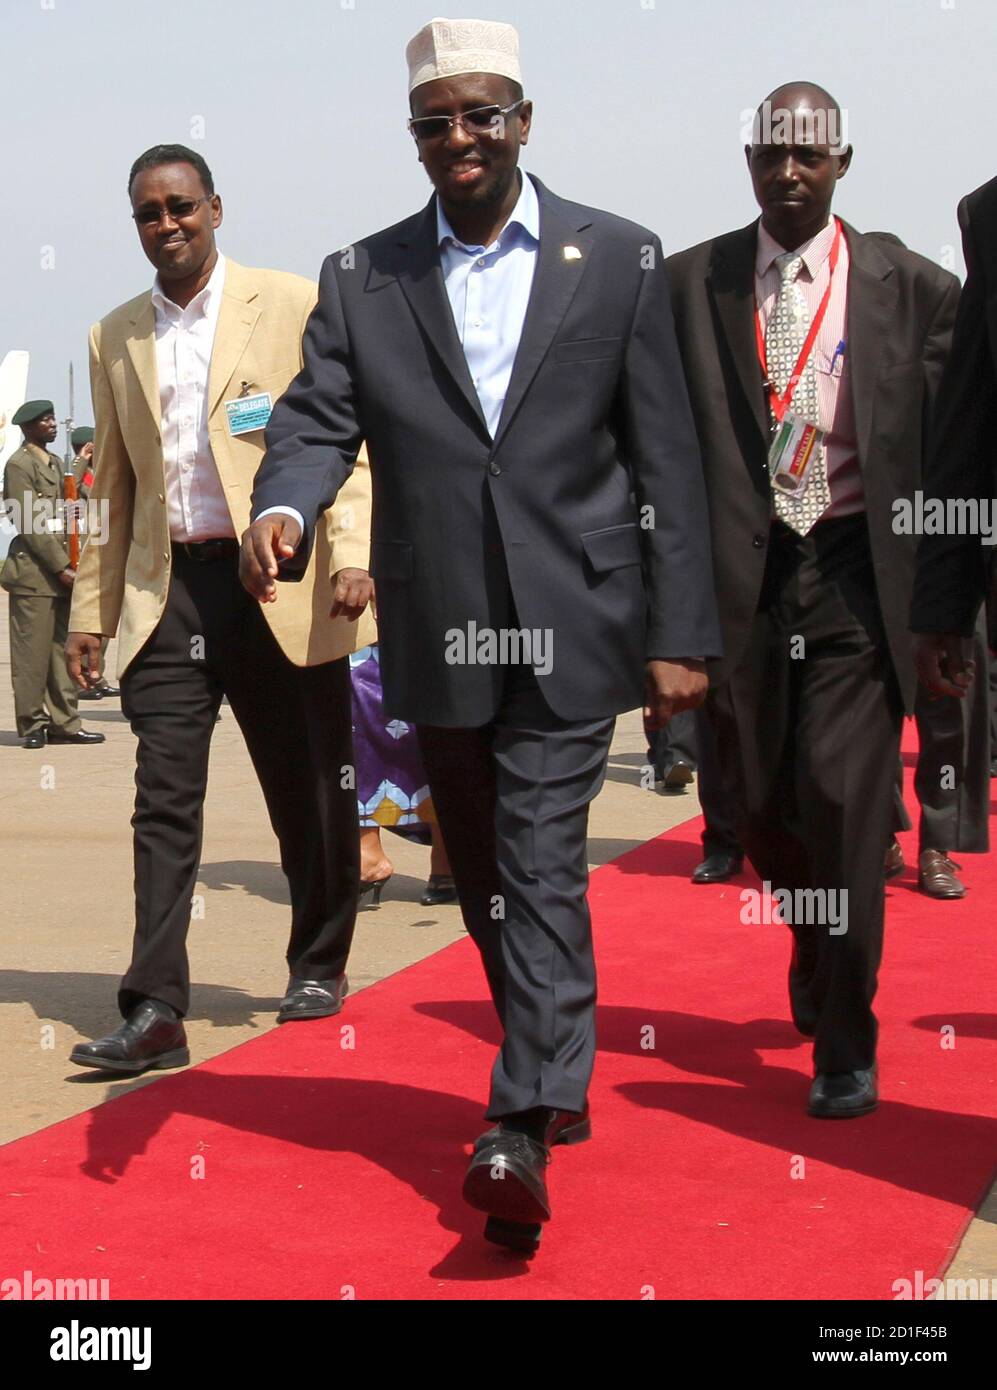 Somalia's President Sheikh Sharif Ahmed (C) arrives at the airport in Entebbe 42km (26 miles) south of Uganda's capital Kampala, July 24, 2010. Sheikh Sharif is in Uganda to attend the African Union summit.   REUTERS/James Akena   (UGANDA - Tags: POLITICS) Stock Photo